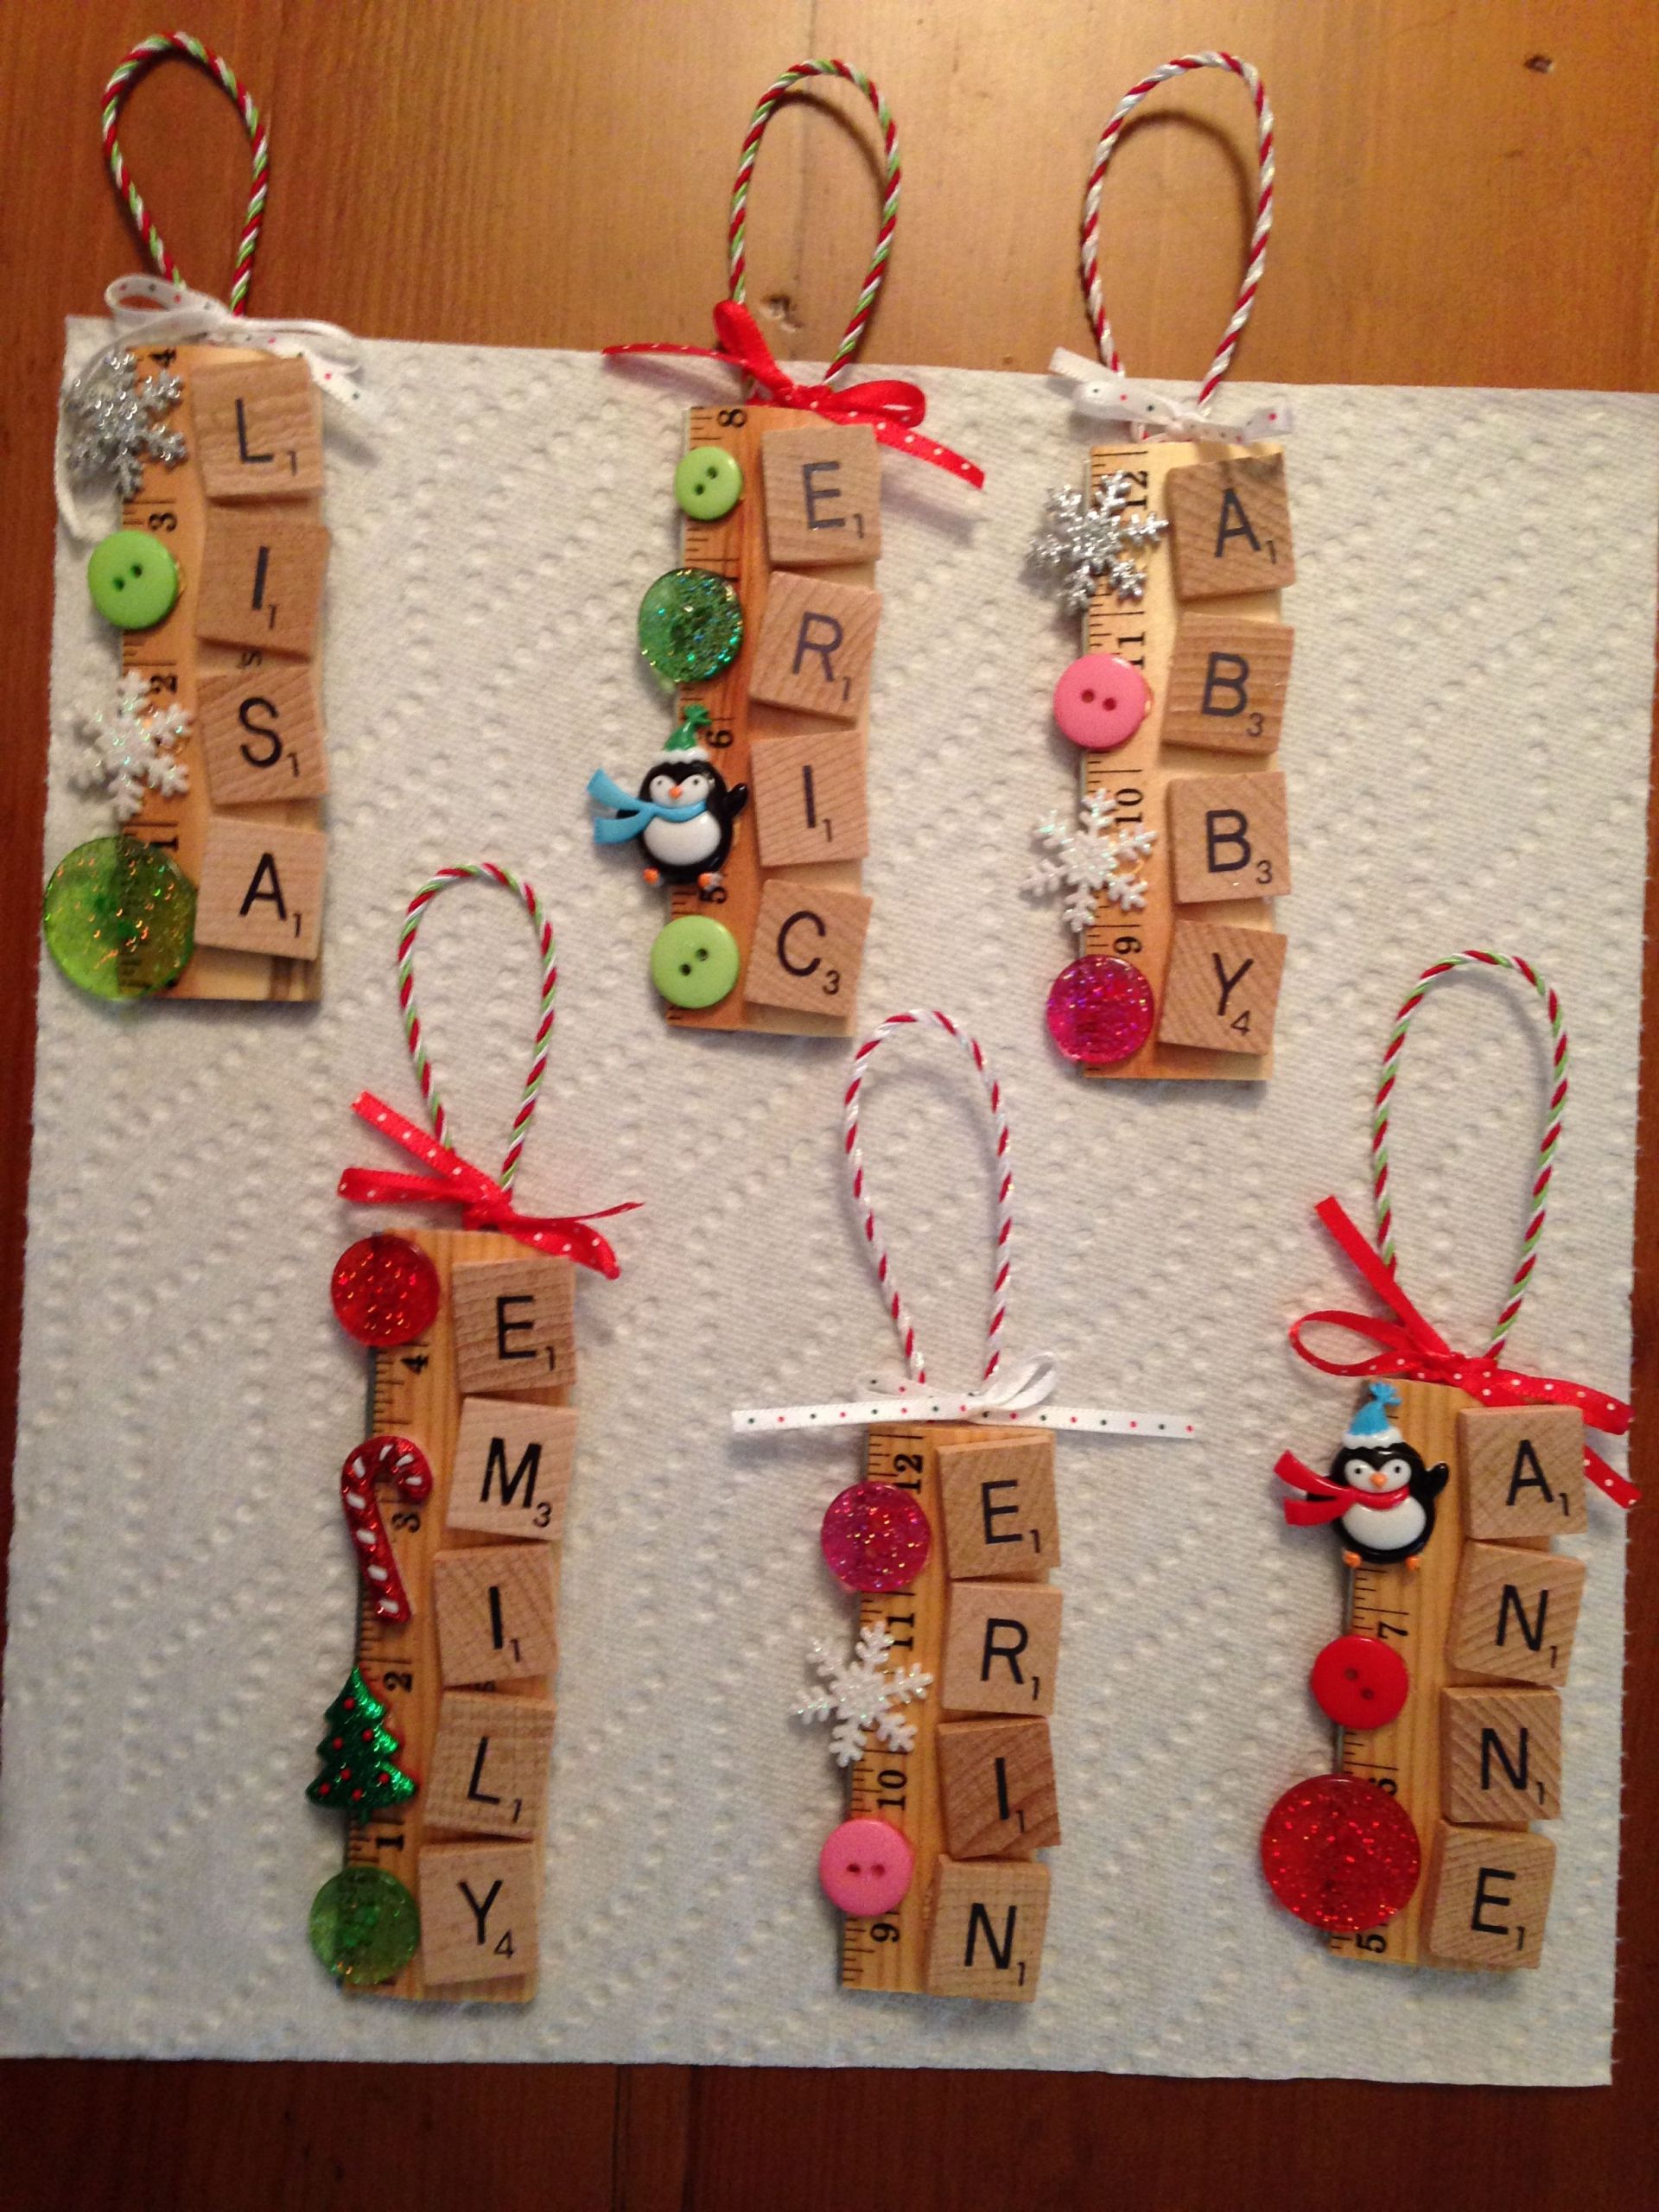 Pinterest Crafts For Gifts
 Scrabble ornaments another idea taken from pinterest